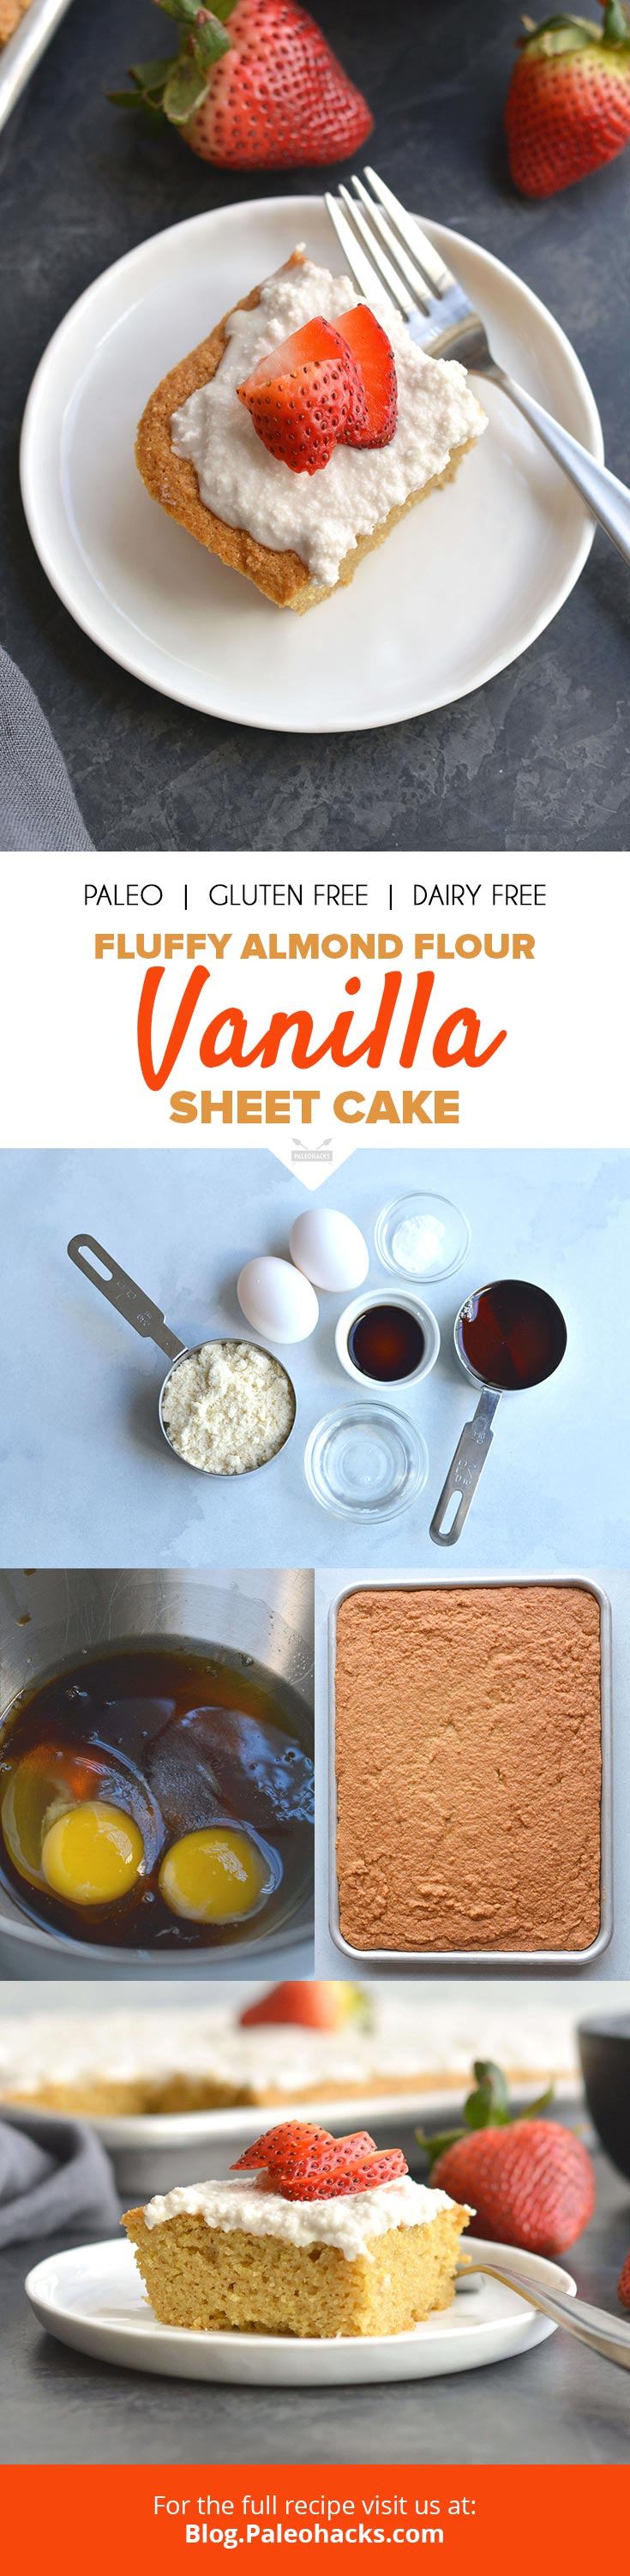 No baking skills required for this easy, 30-minute Paleo Vanilla Cake! You just need a sheet pan and a serious sweet tooth.